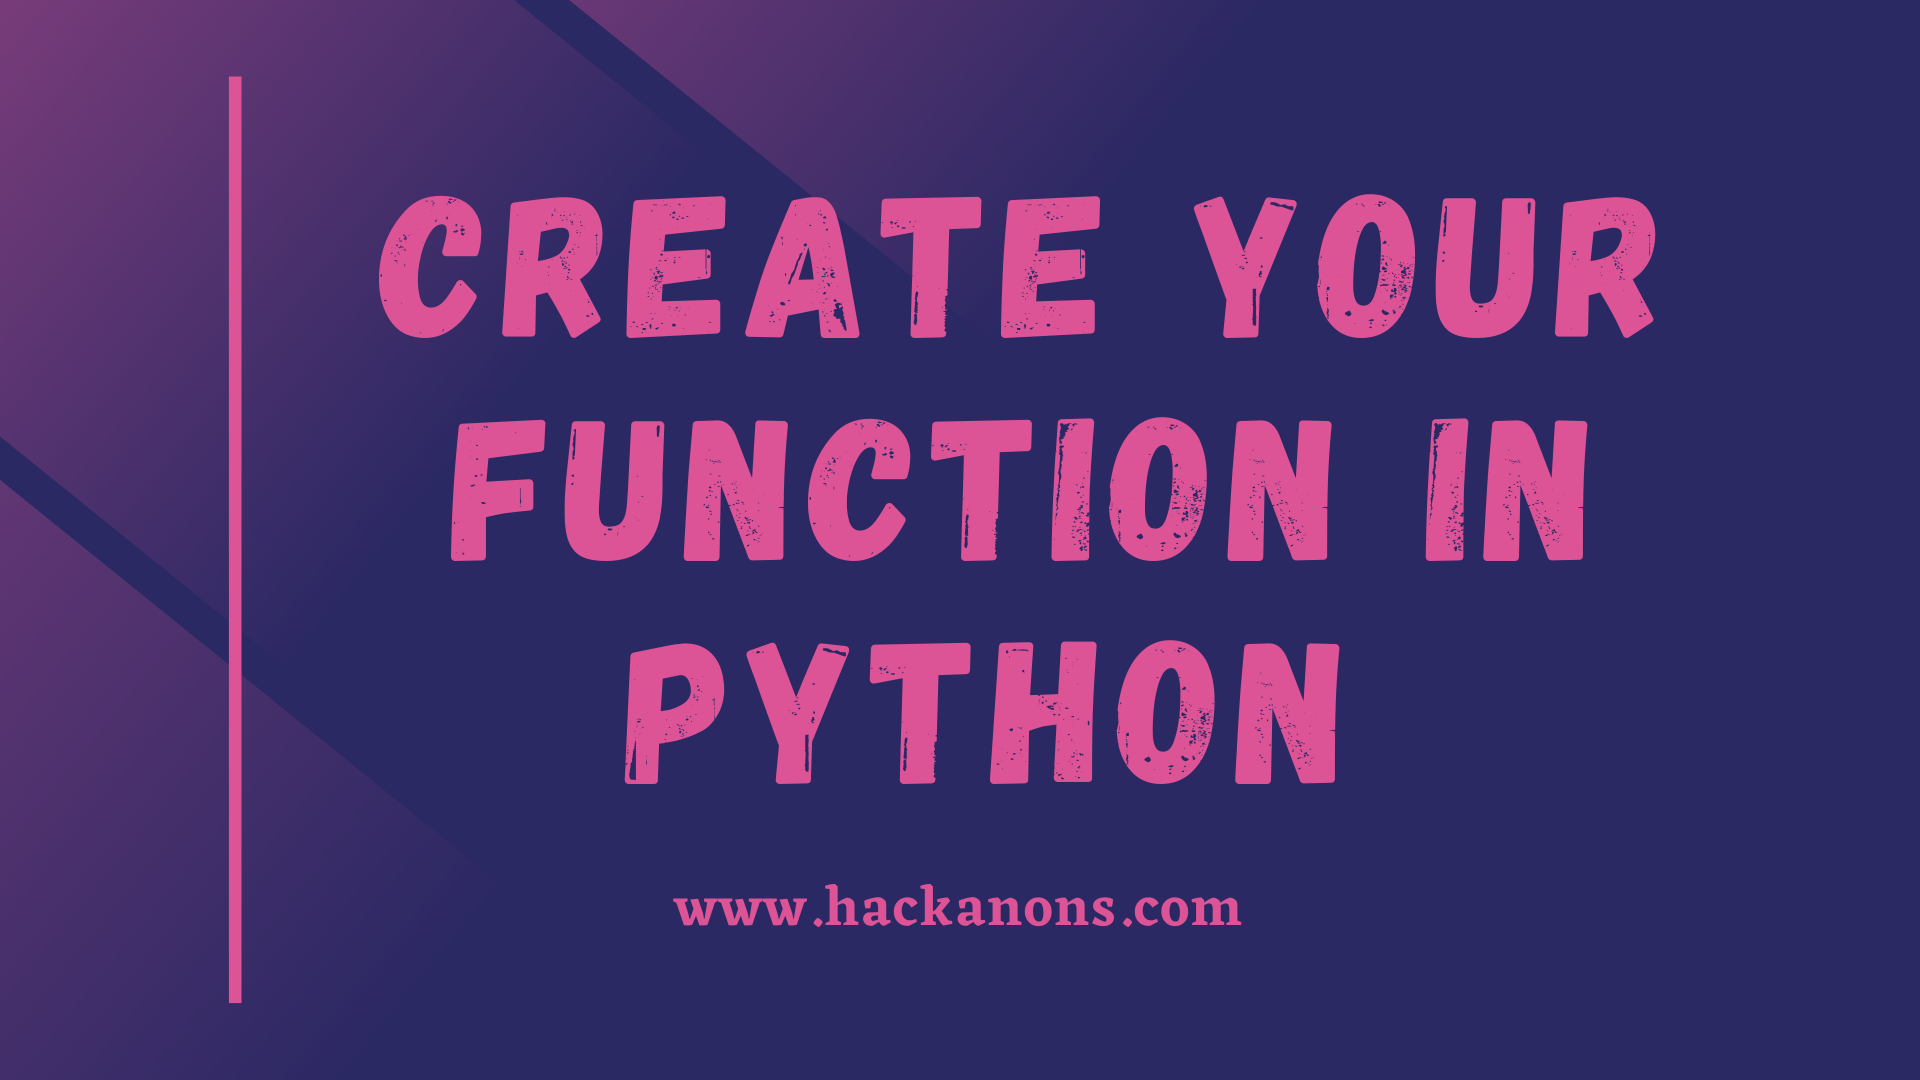 CREATE YOUR FUNCTION IN PYTHON